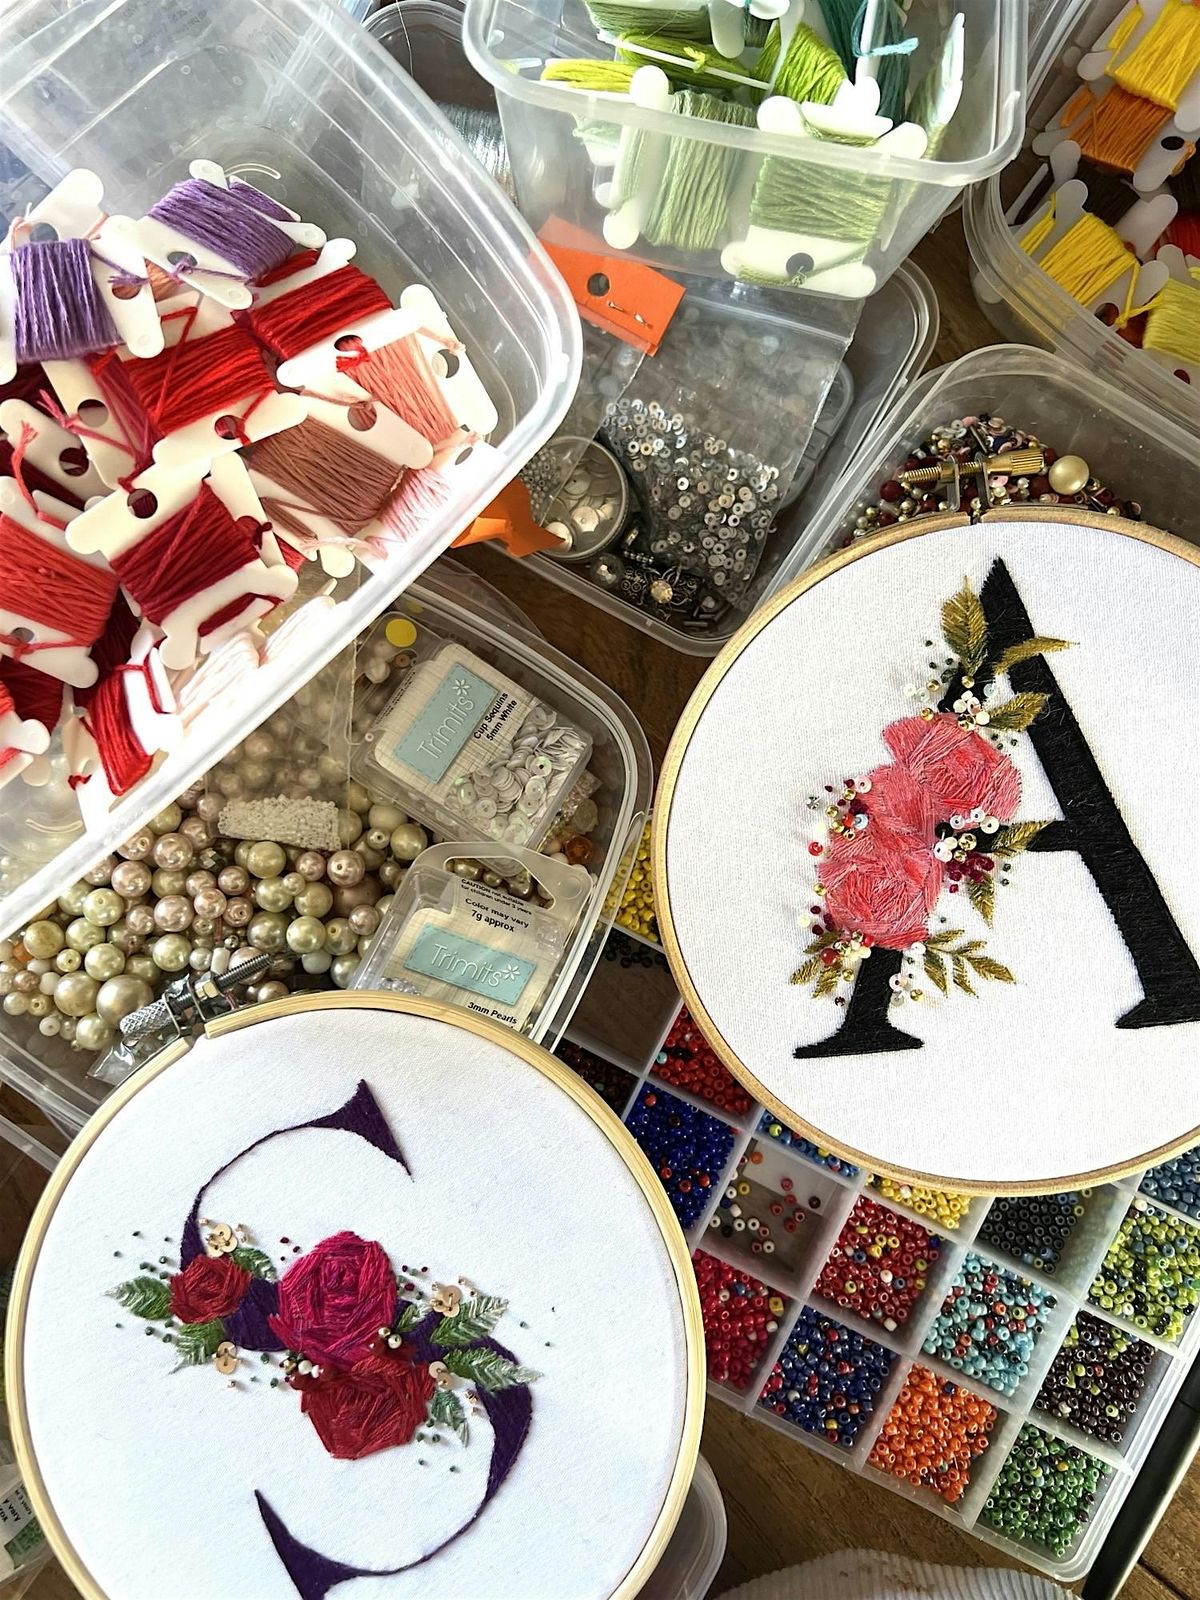 Sip & Sew Embroidery Workshop at The Green Man, Putney